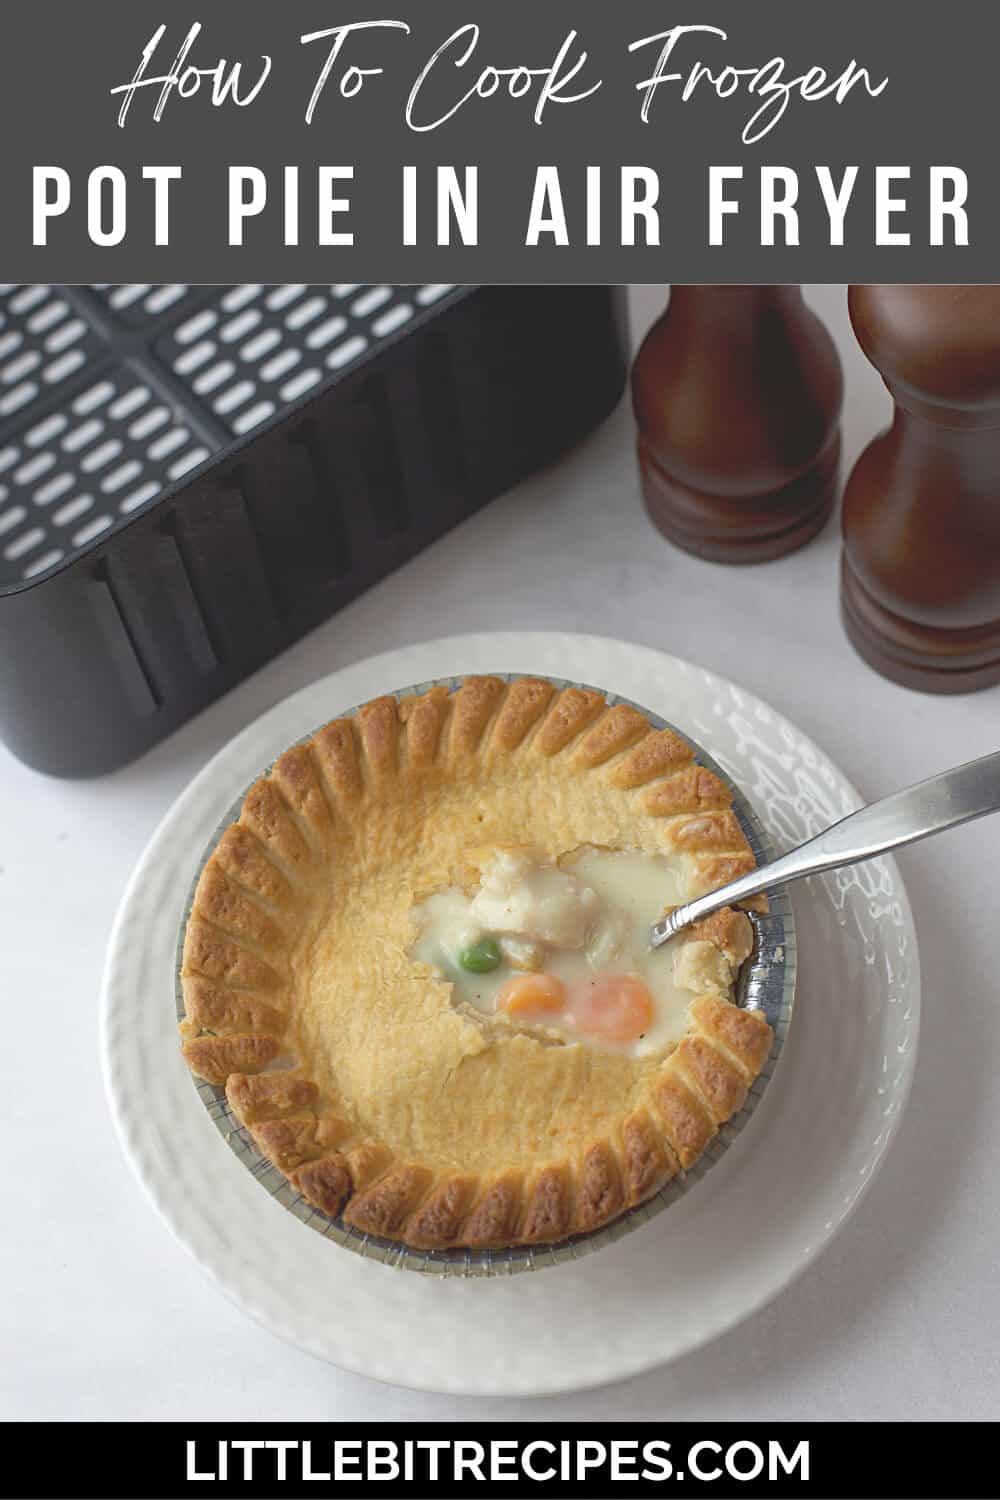 air fryer cooked pot pie with text overlay.